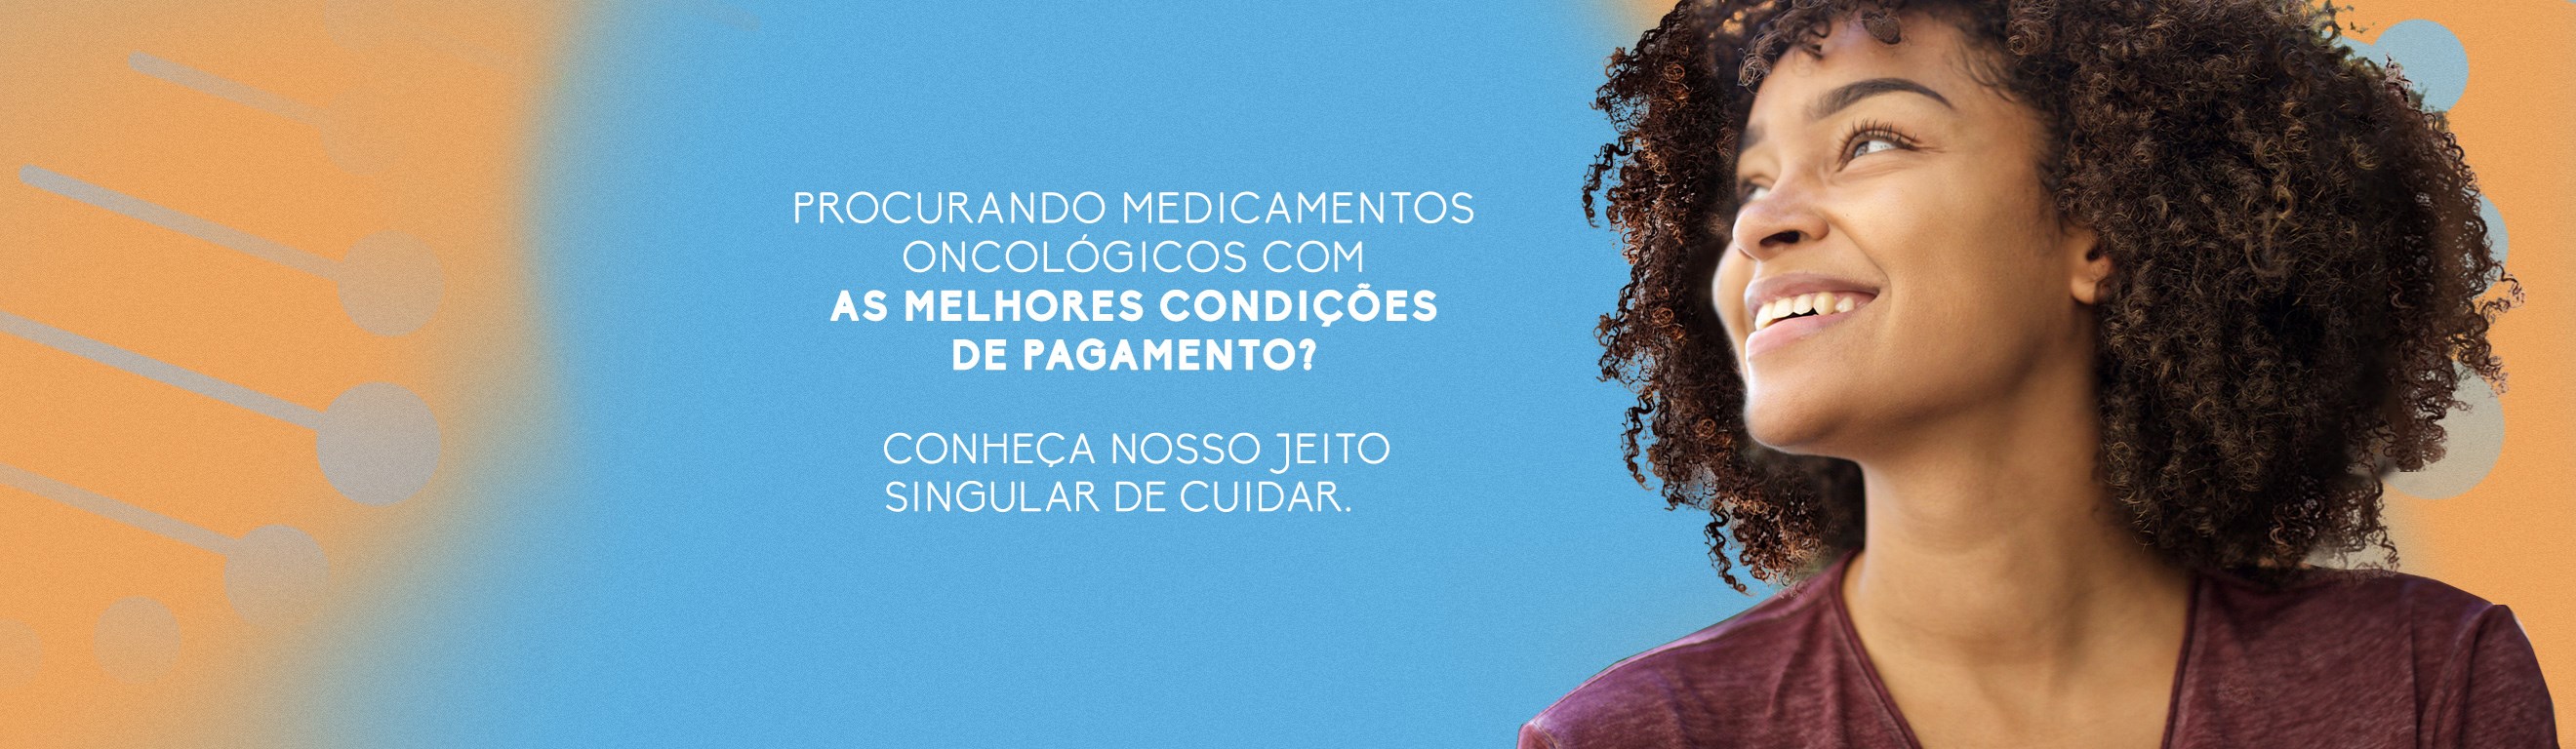 Oncologico